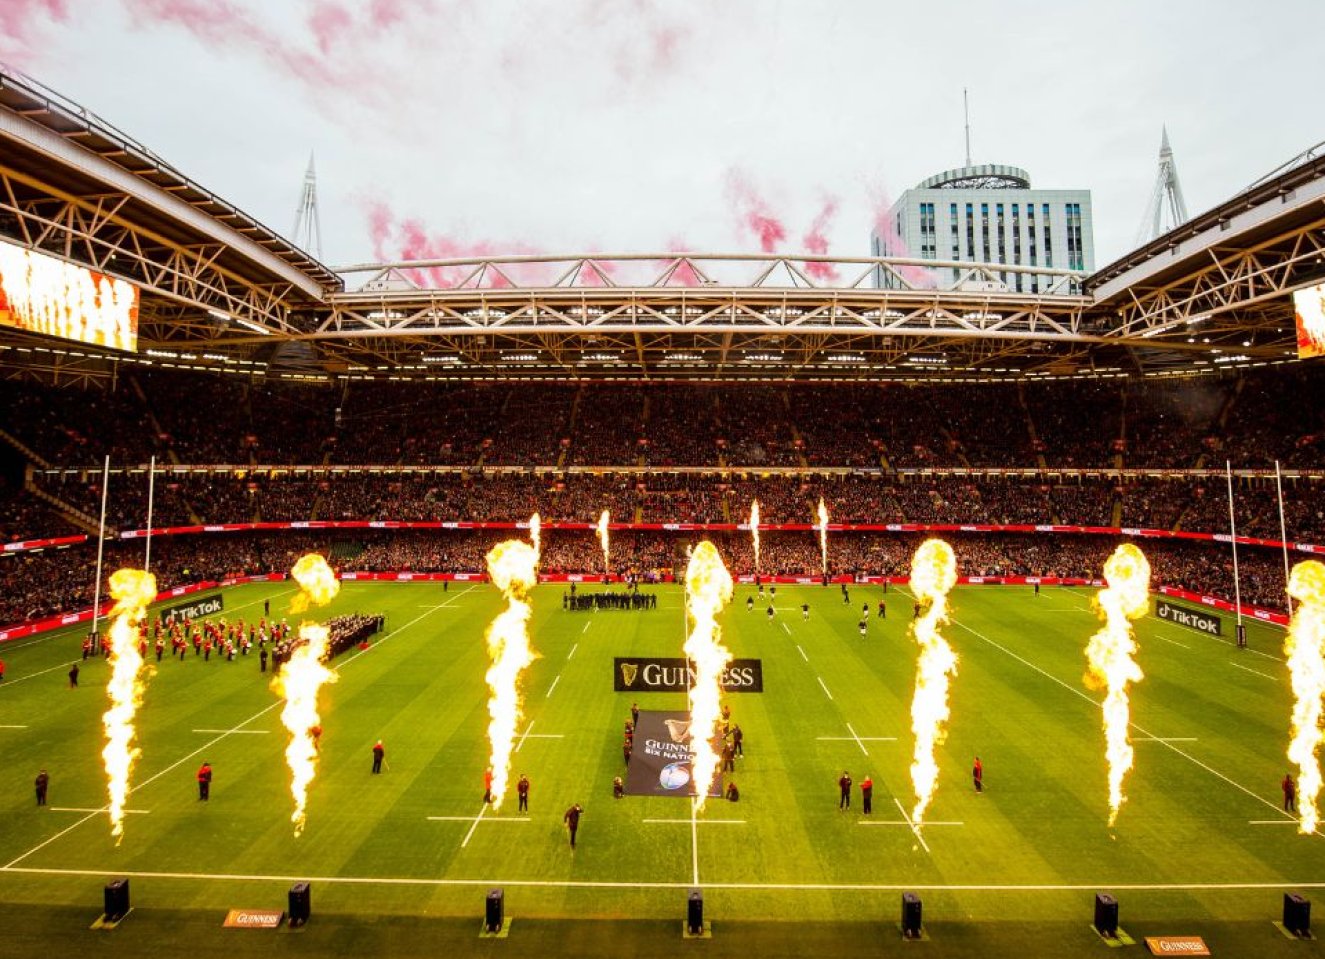 Guinness Six Nations ticket hospitality package for rugby fans image